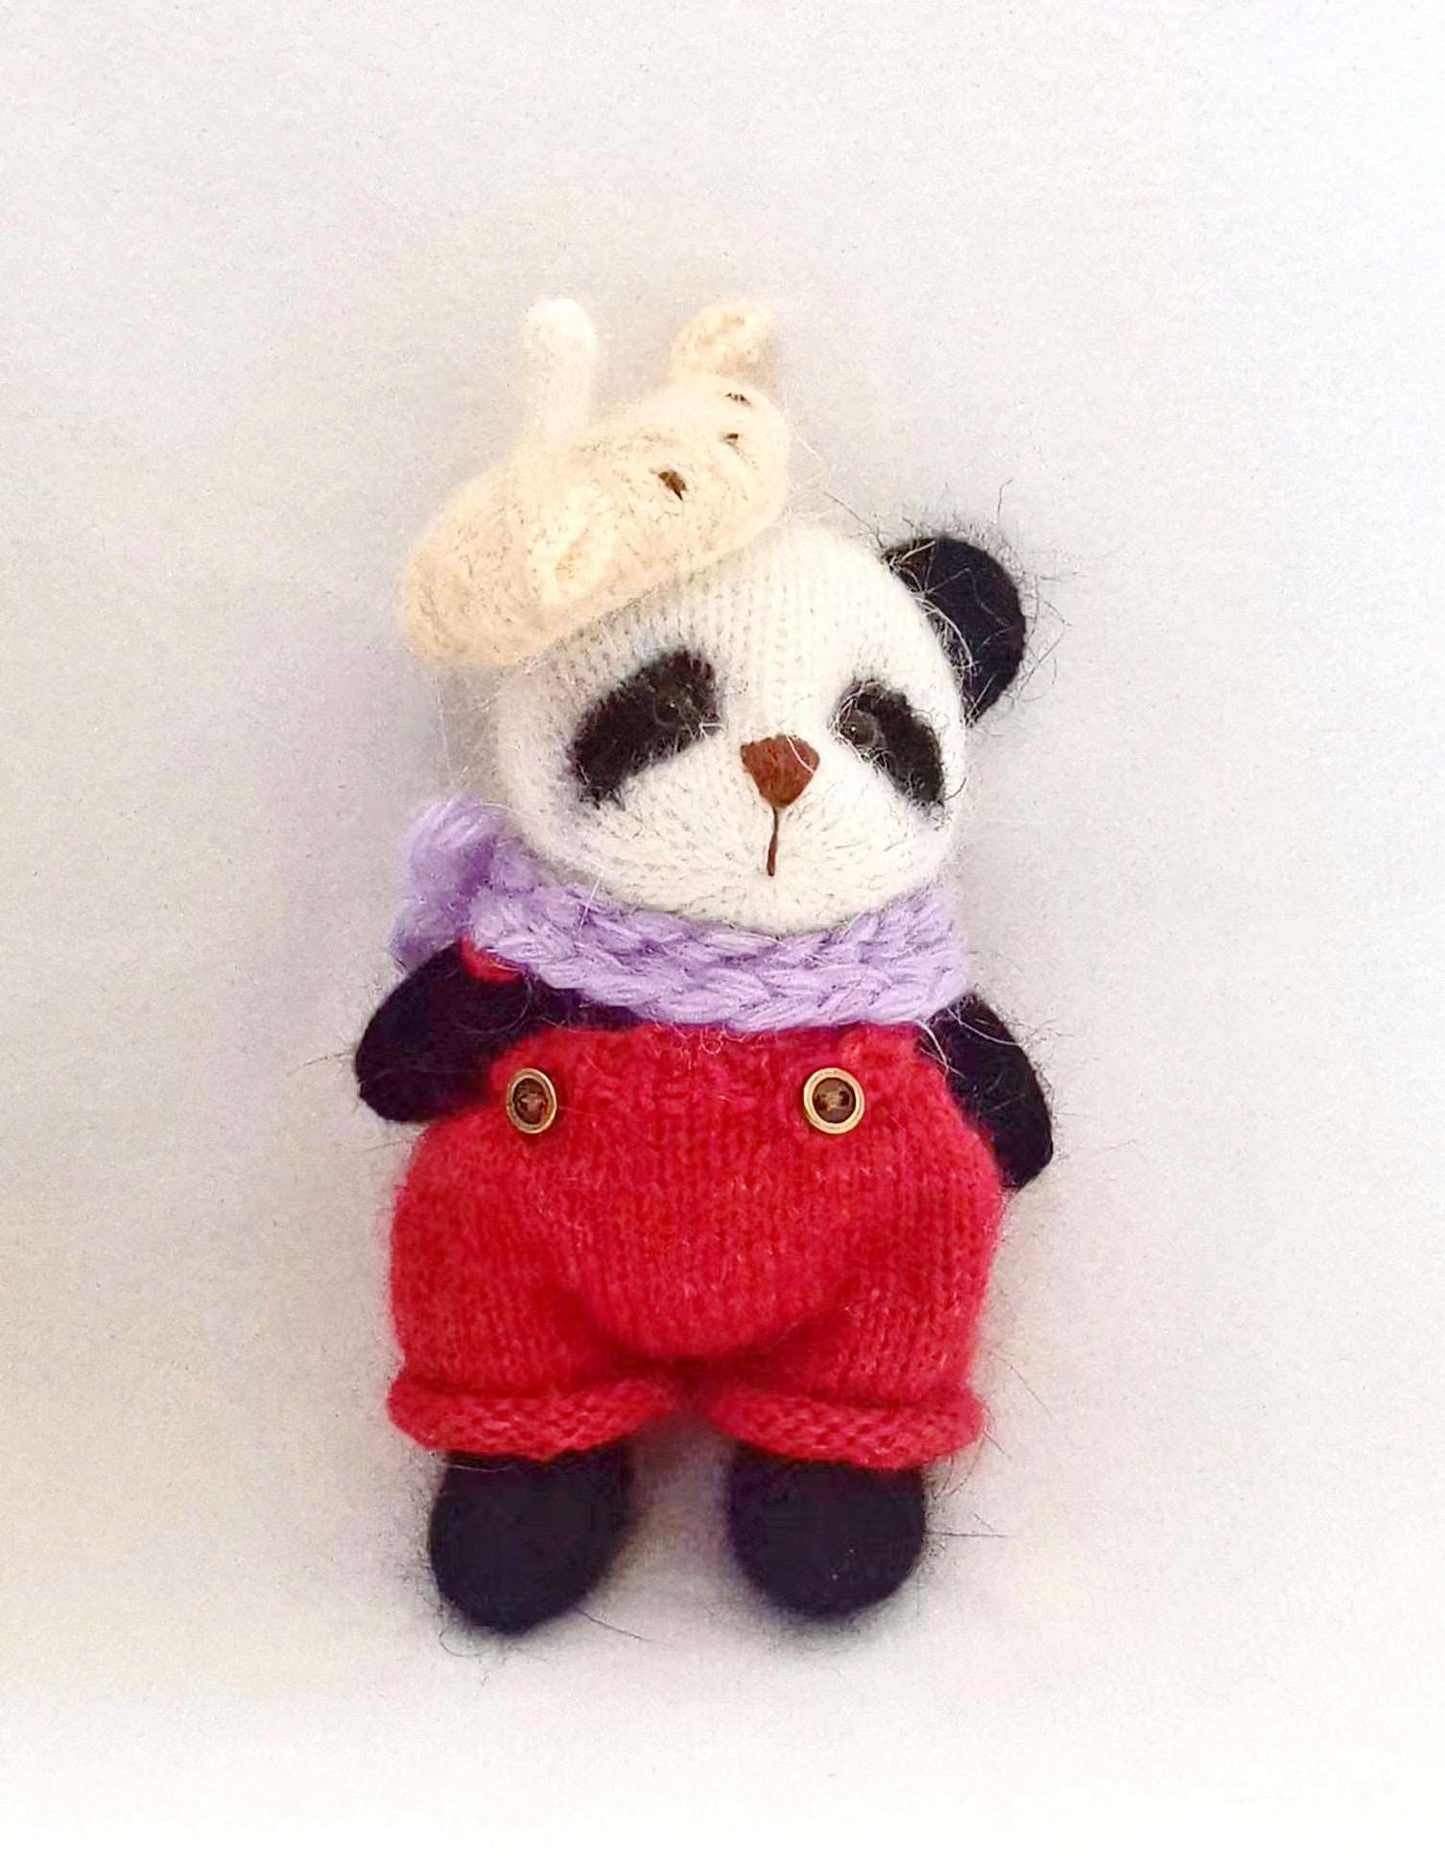 Handcrafted Crocheted Panda Figurine for Eco-Conscious Consumers